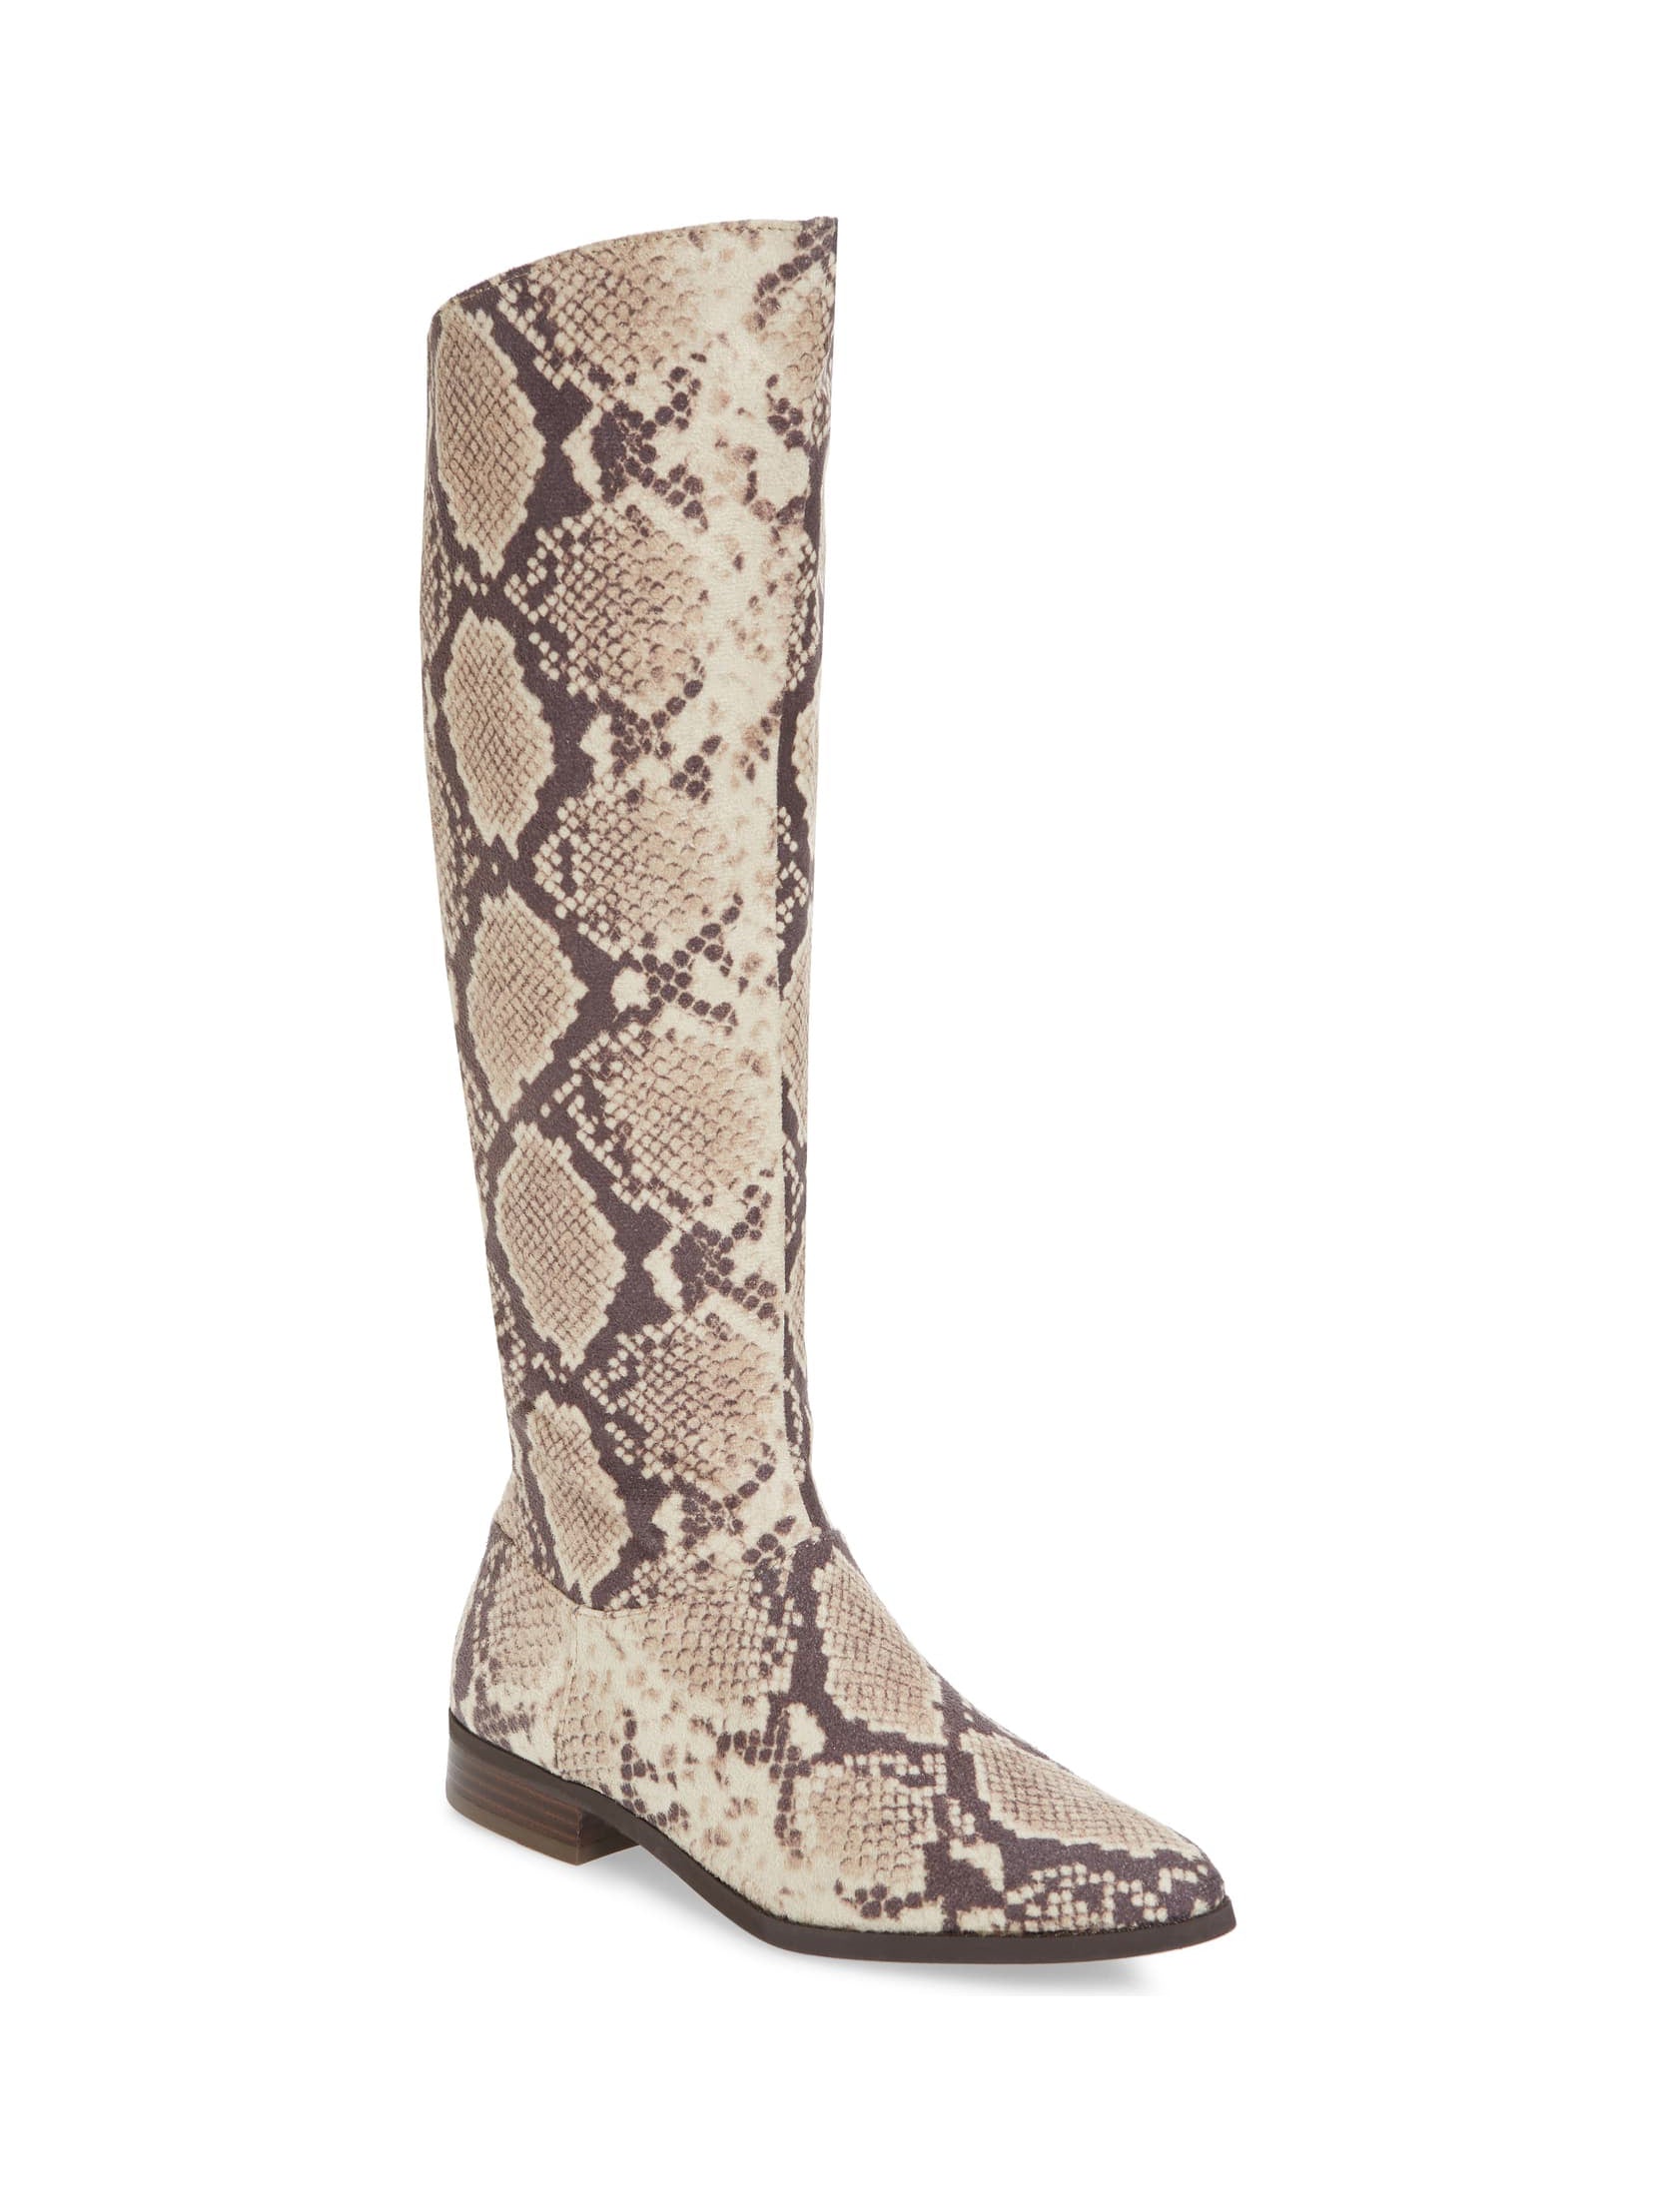 snakeskin riding boots